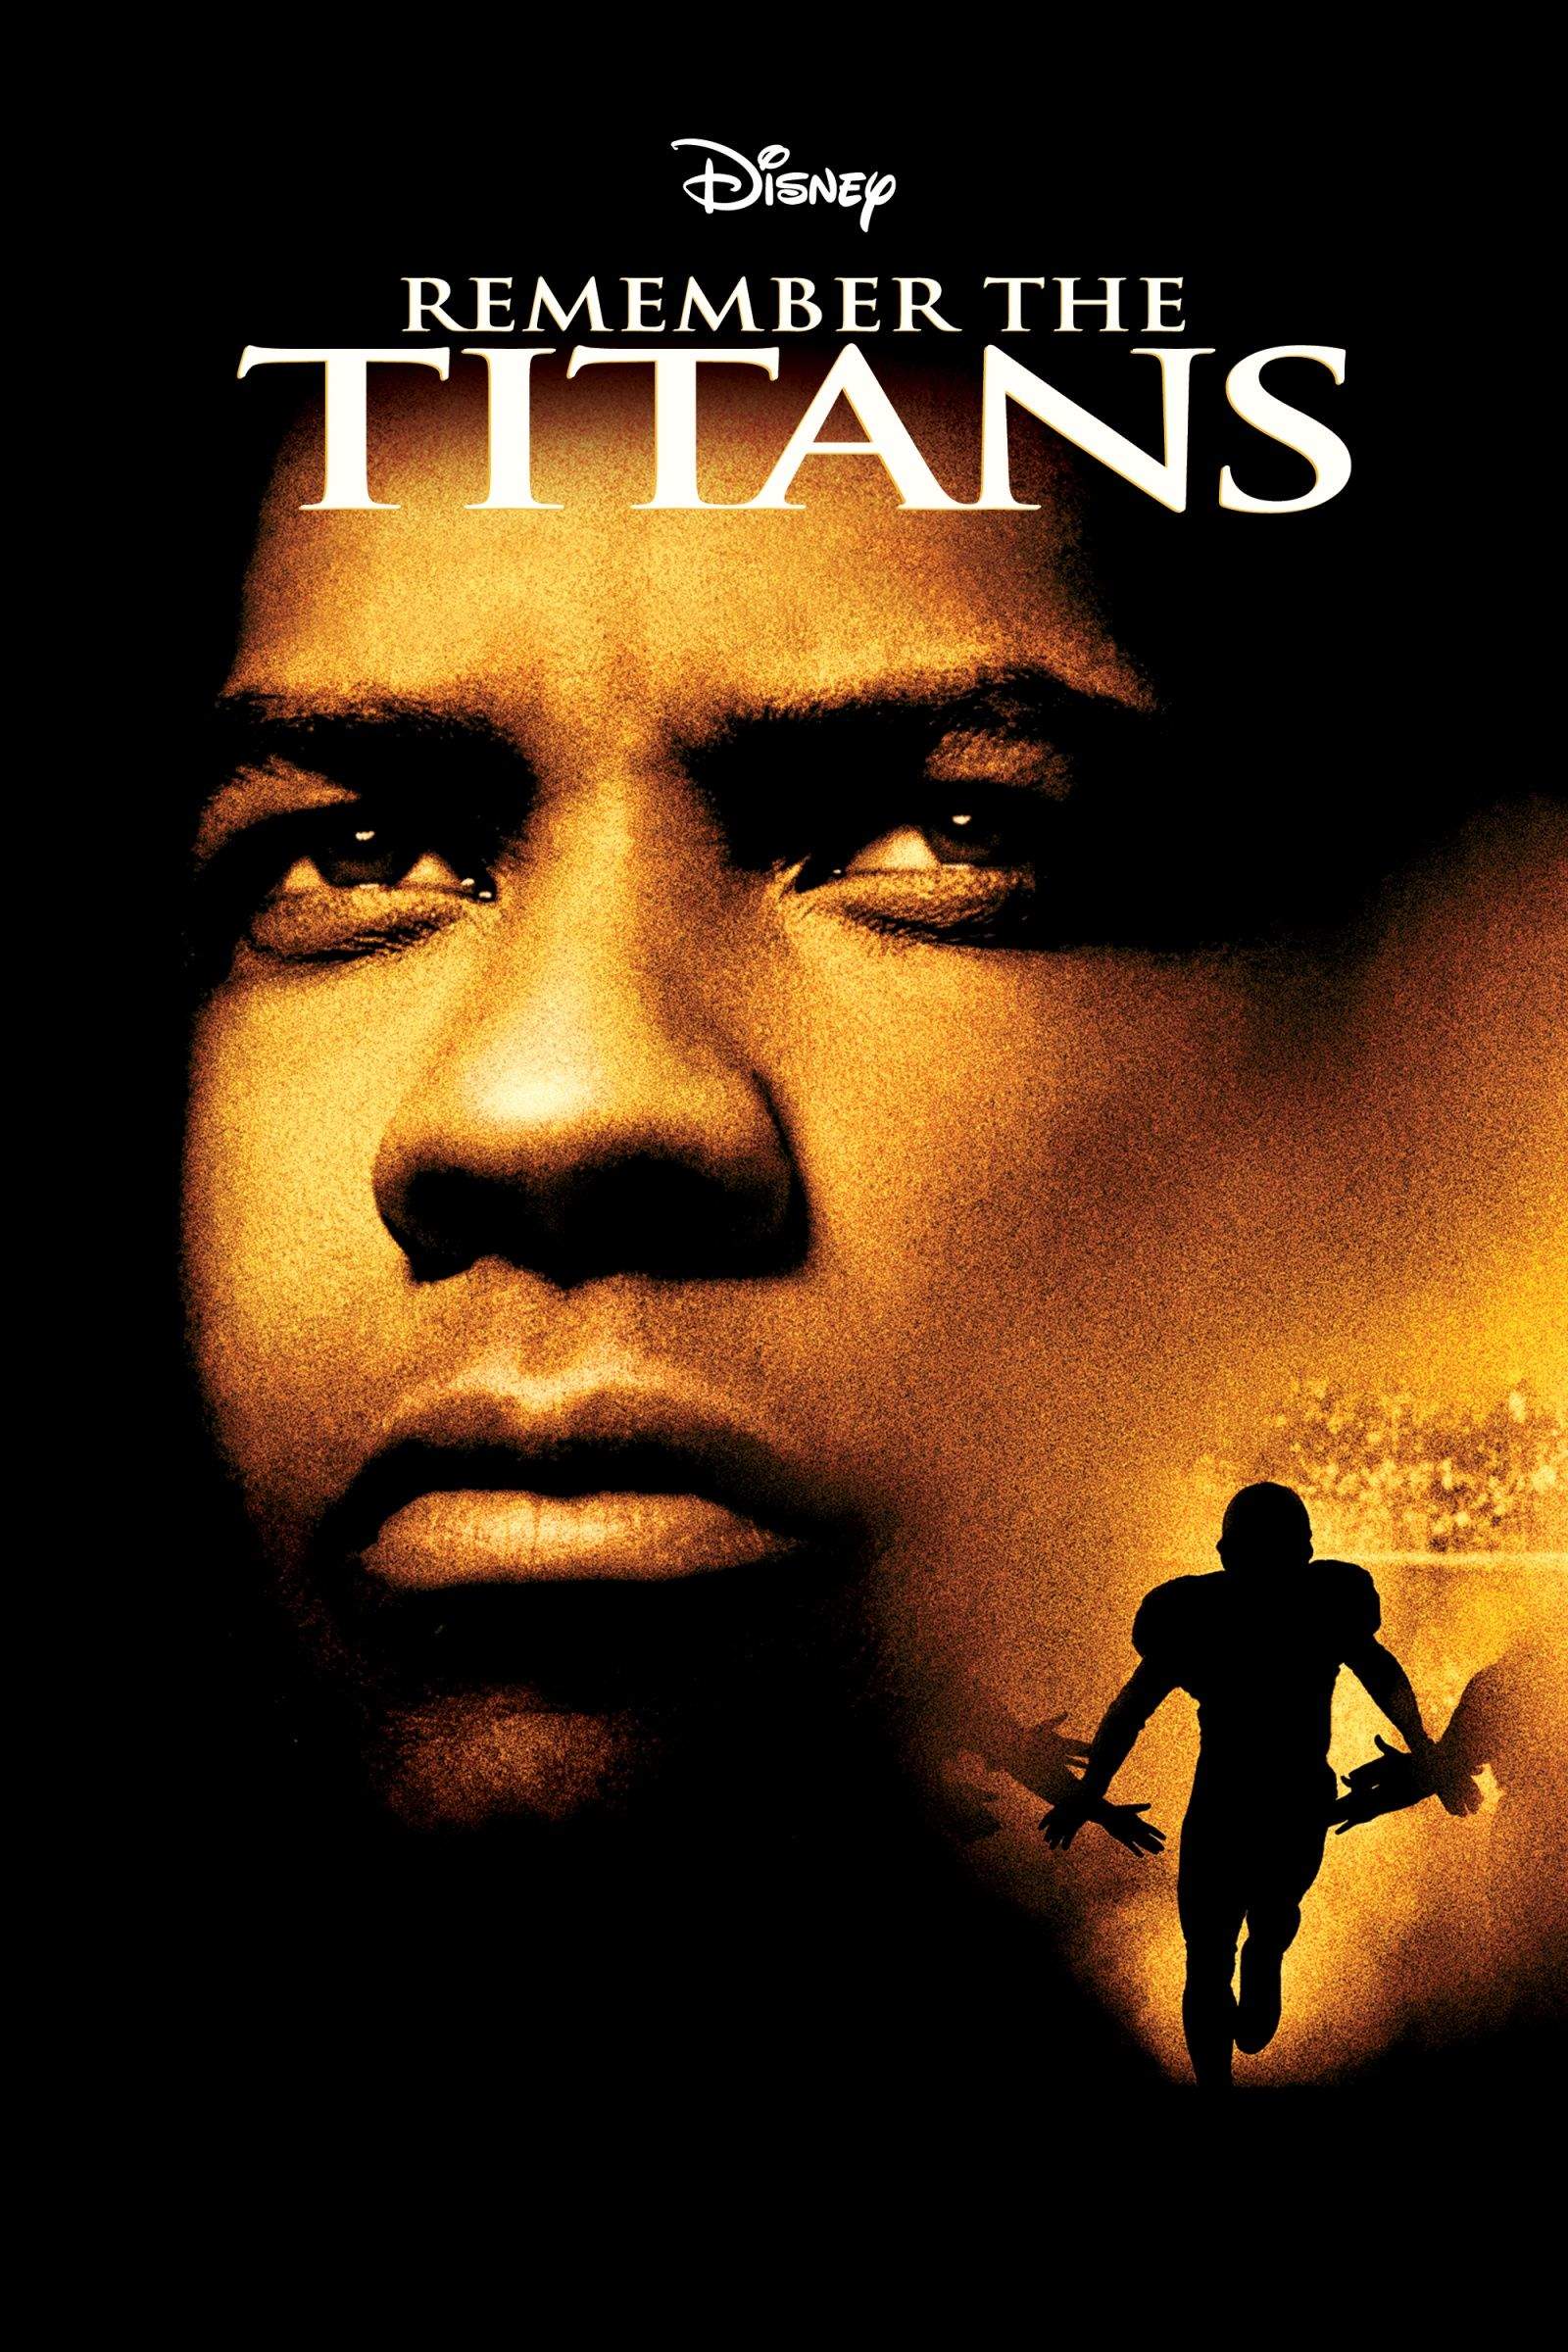 Remember the Titans is a movie starring Denzel Washington as a shouty coach who turns a disorganized football into a crack, disciplined outfit. Credit: Disney